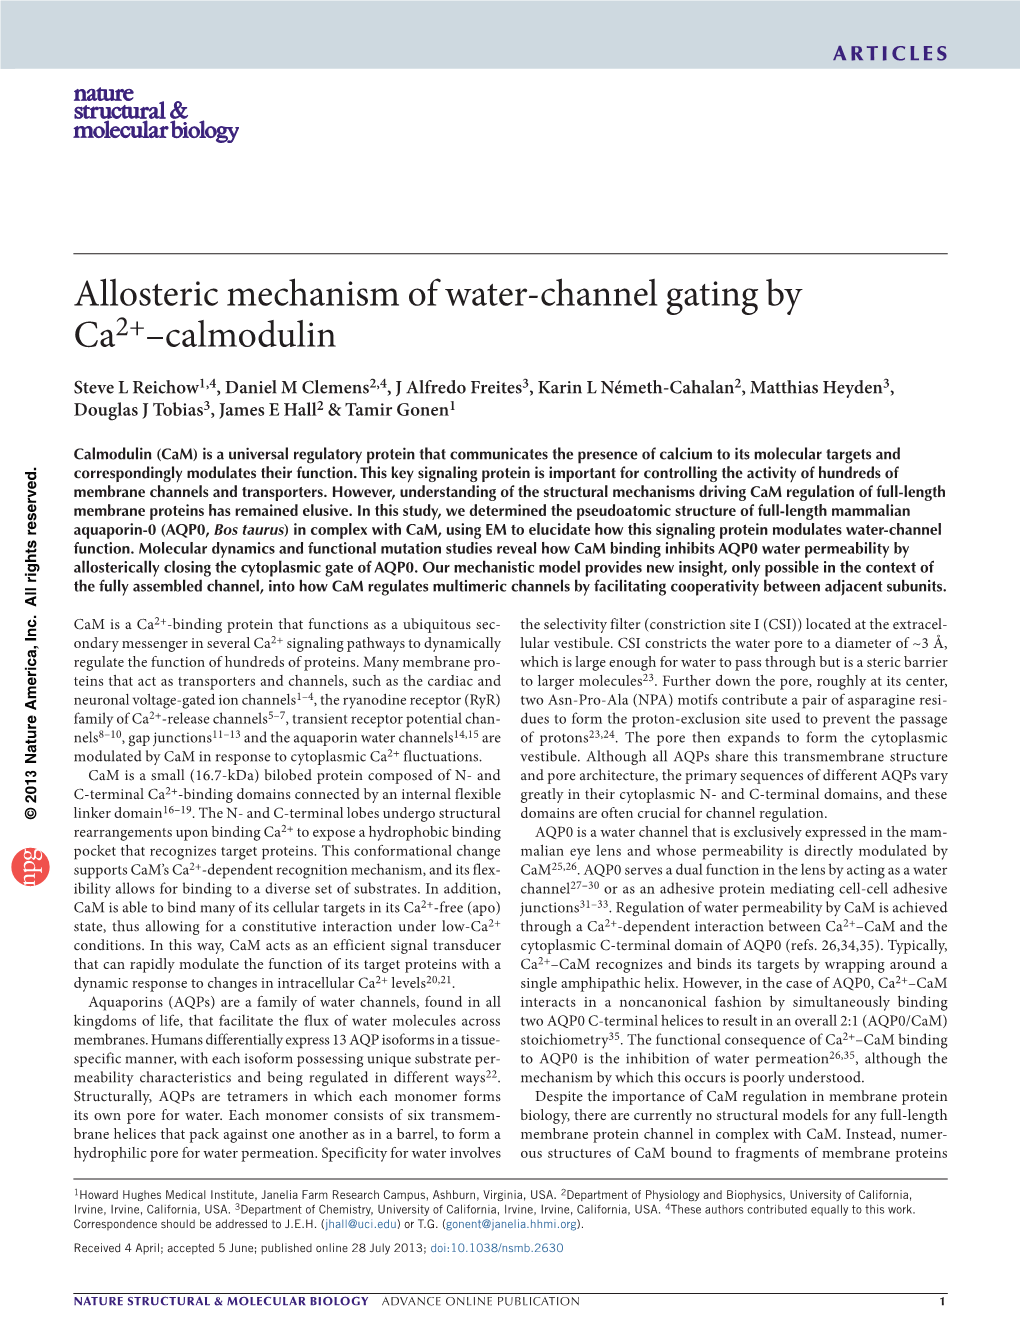 Allosteric Mechanism of Water-Channel Gating by Ca2+